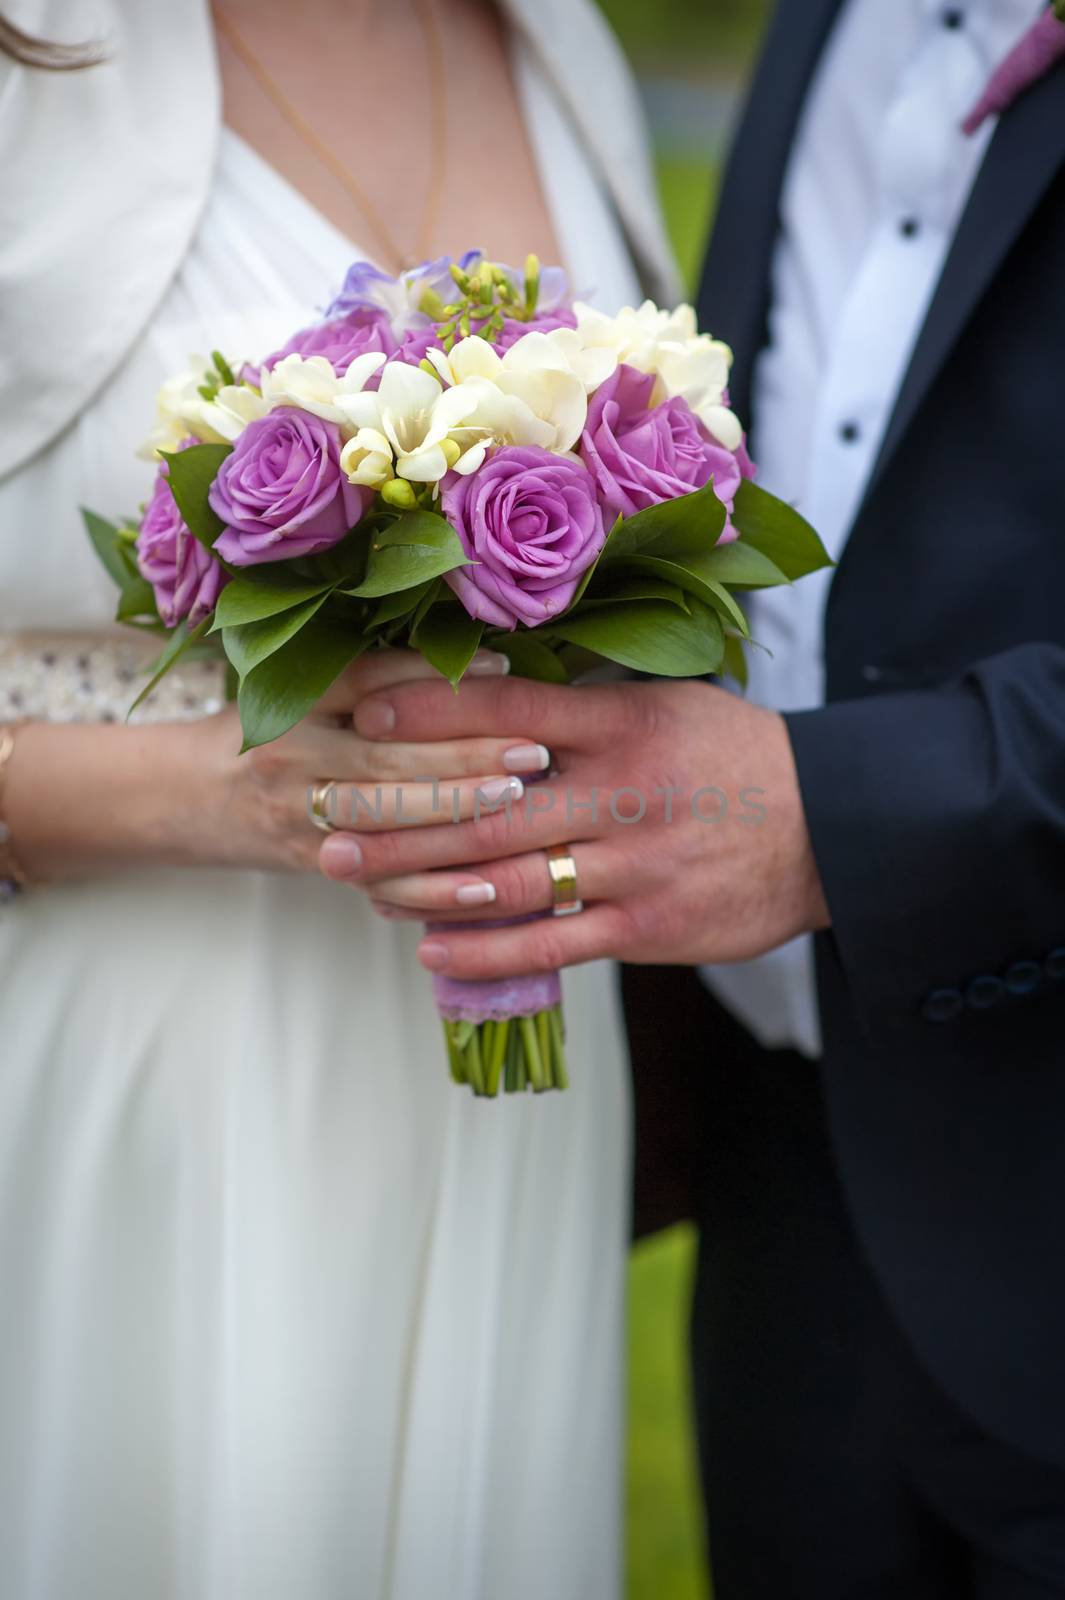 Beautiful wedding bouquet in brides and grooms hands by timonko